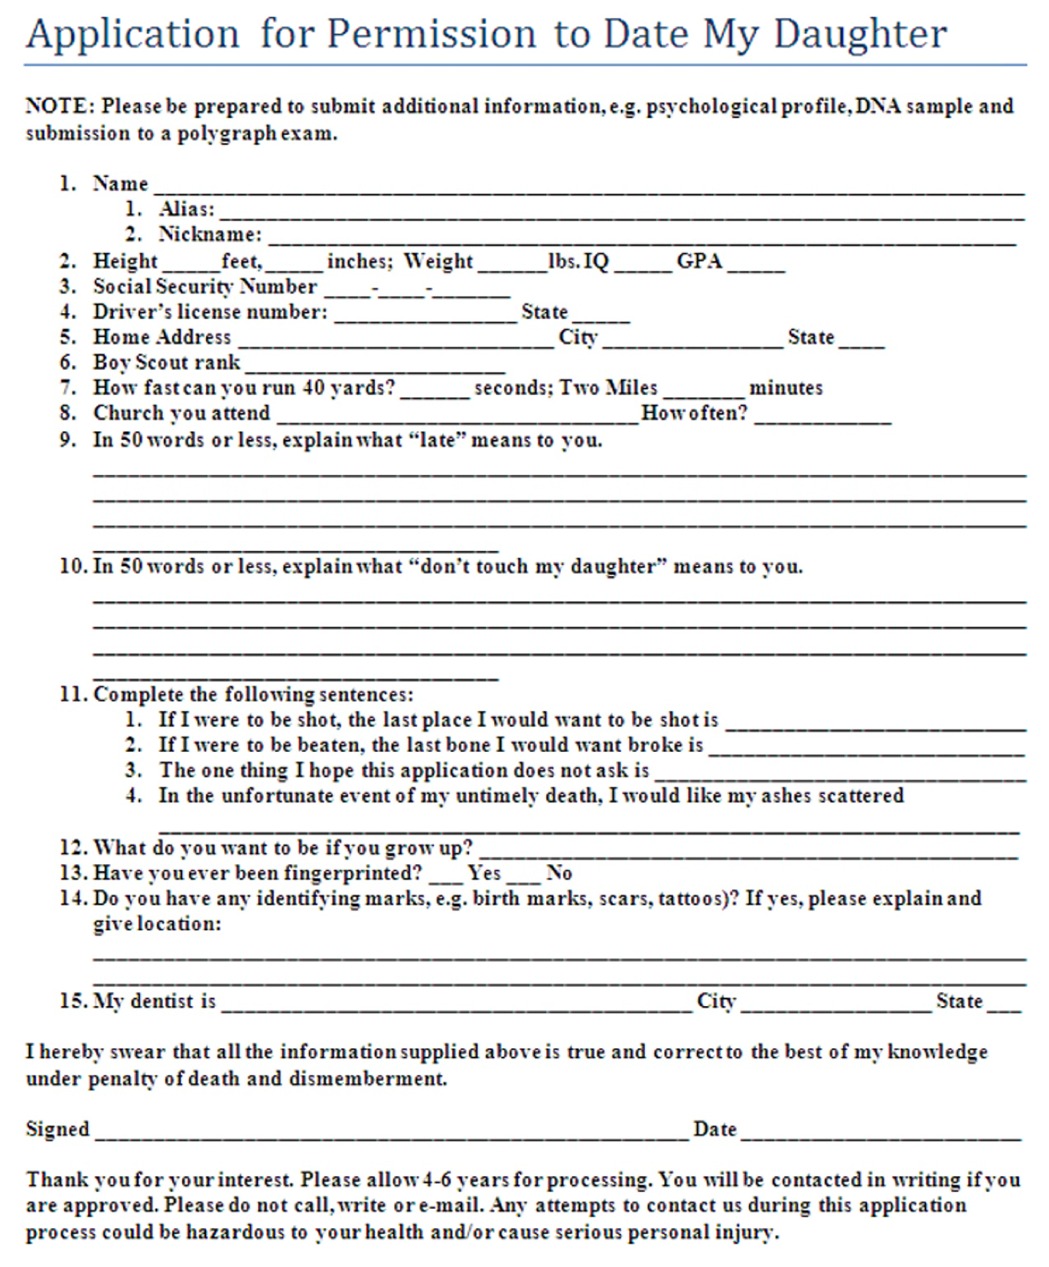 Application for Permission to Date My Daughter